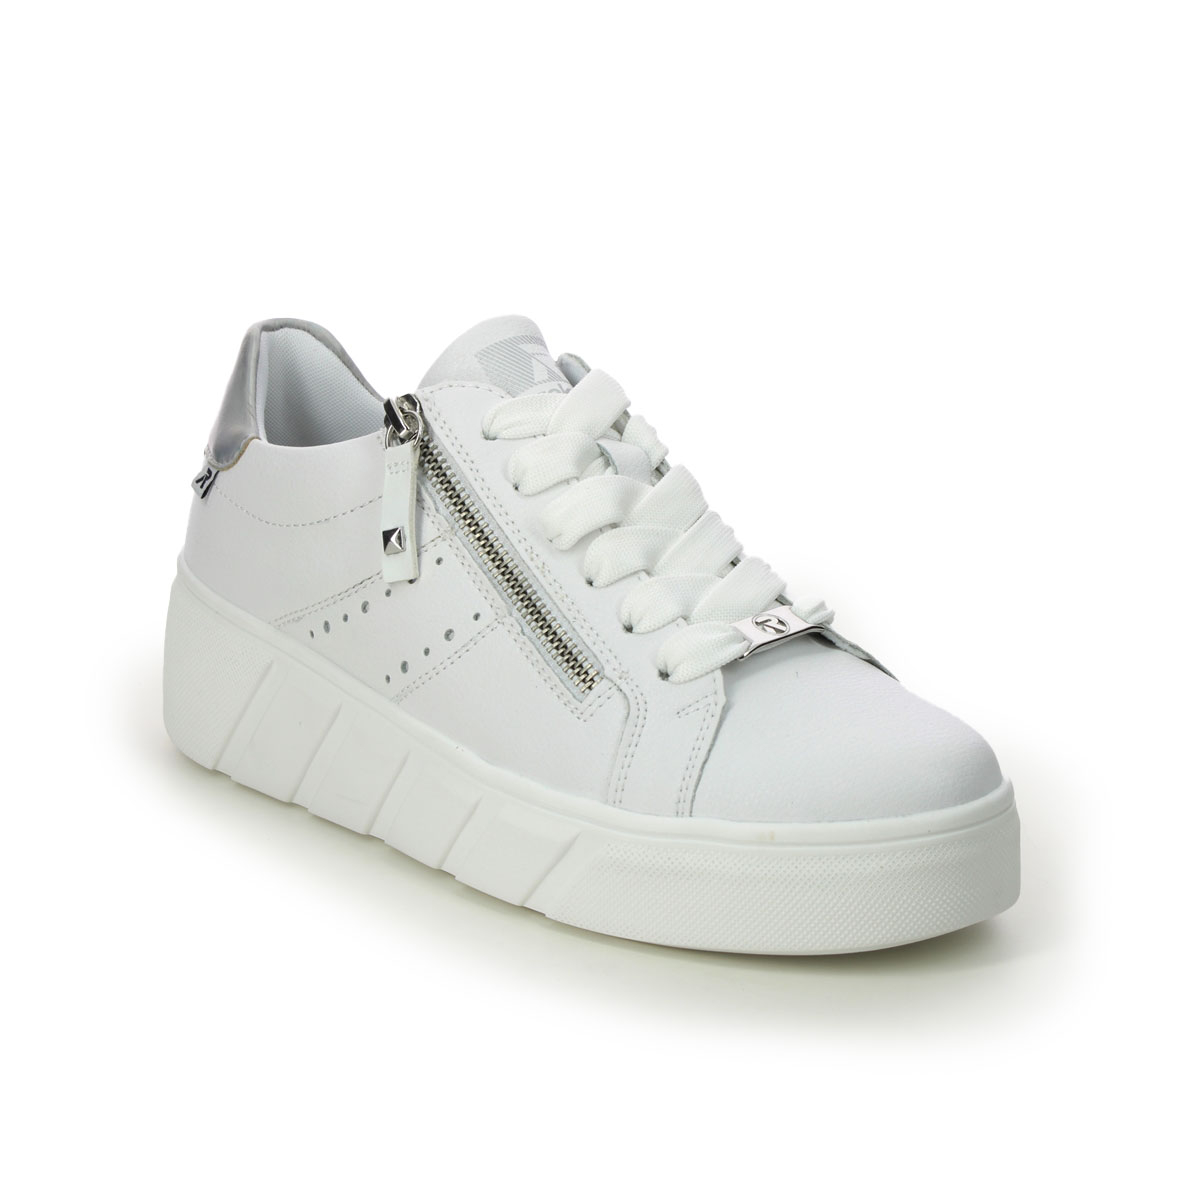 Rieker W0505-80 WHITE LEATHER Womens trainers in a Plain Leather in Size 37